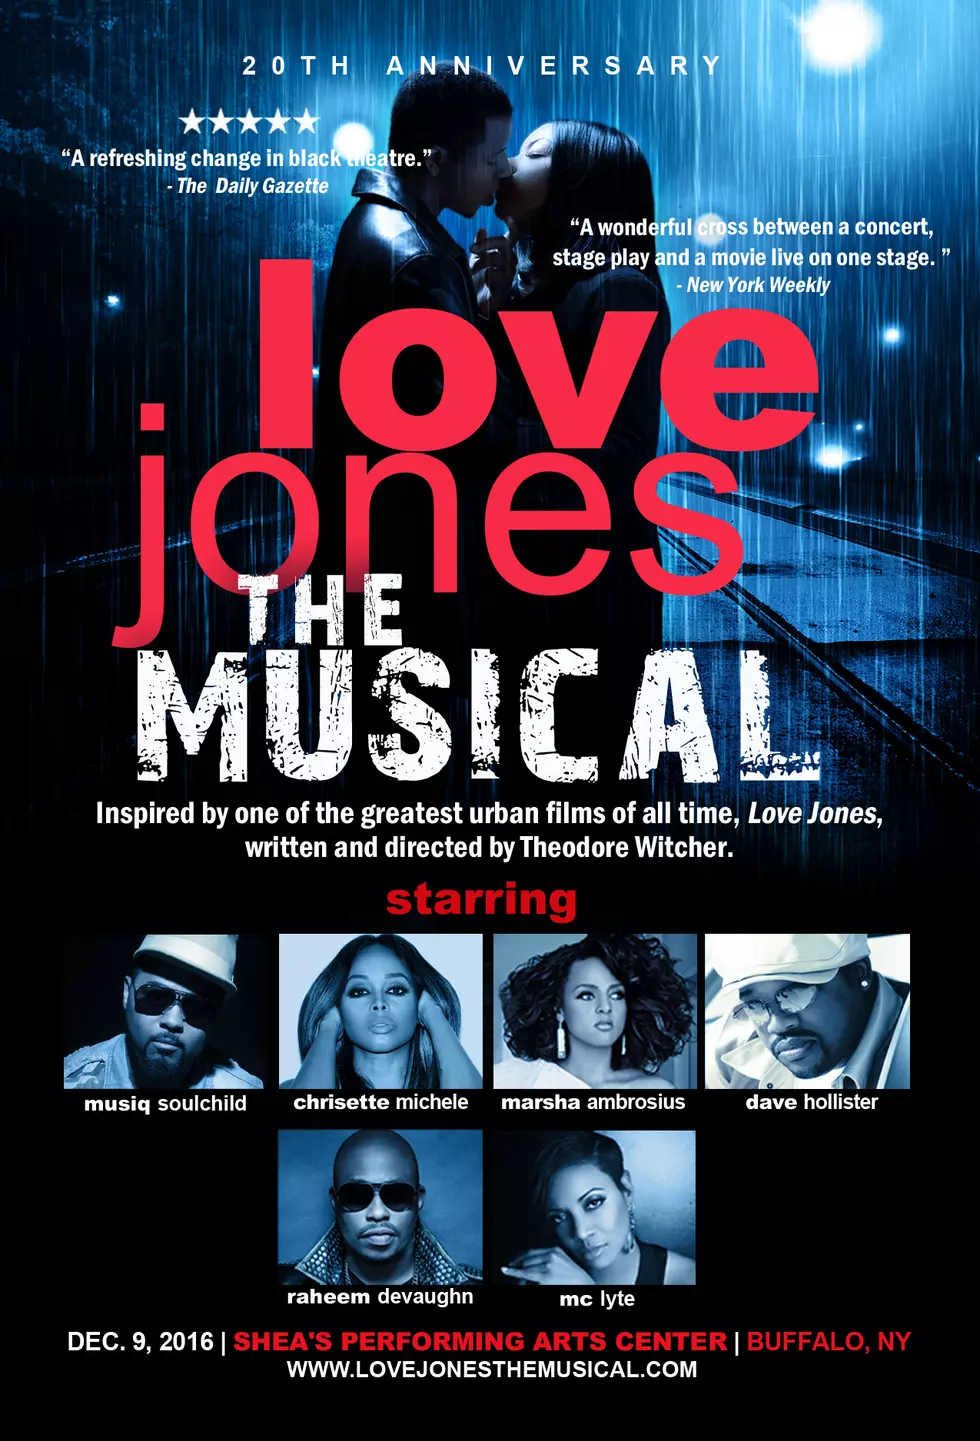 Win A V.I.P. Package To See “Love Jones” The Musical